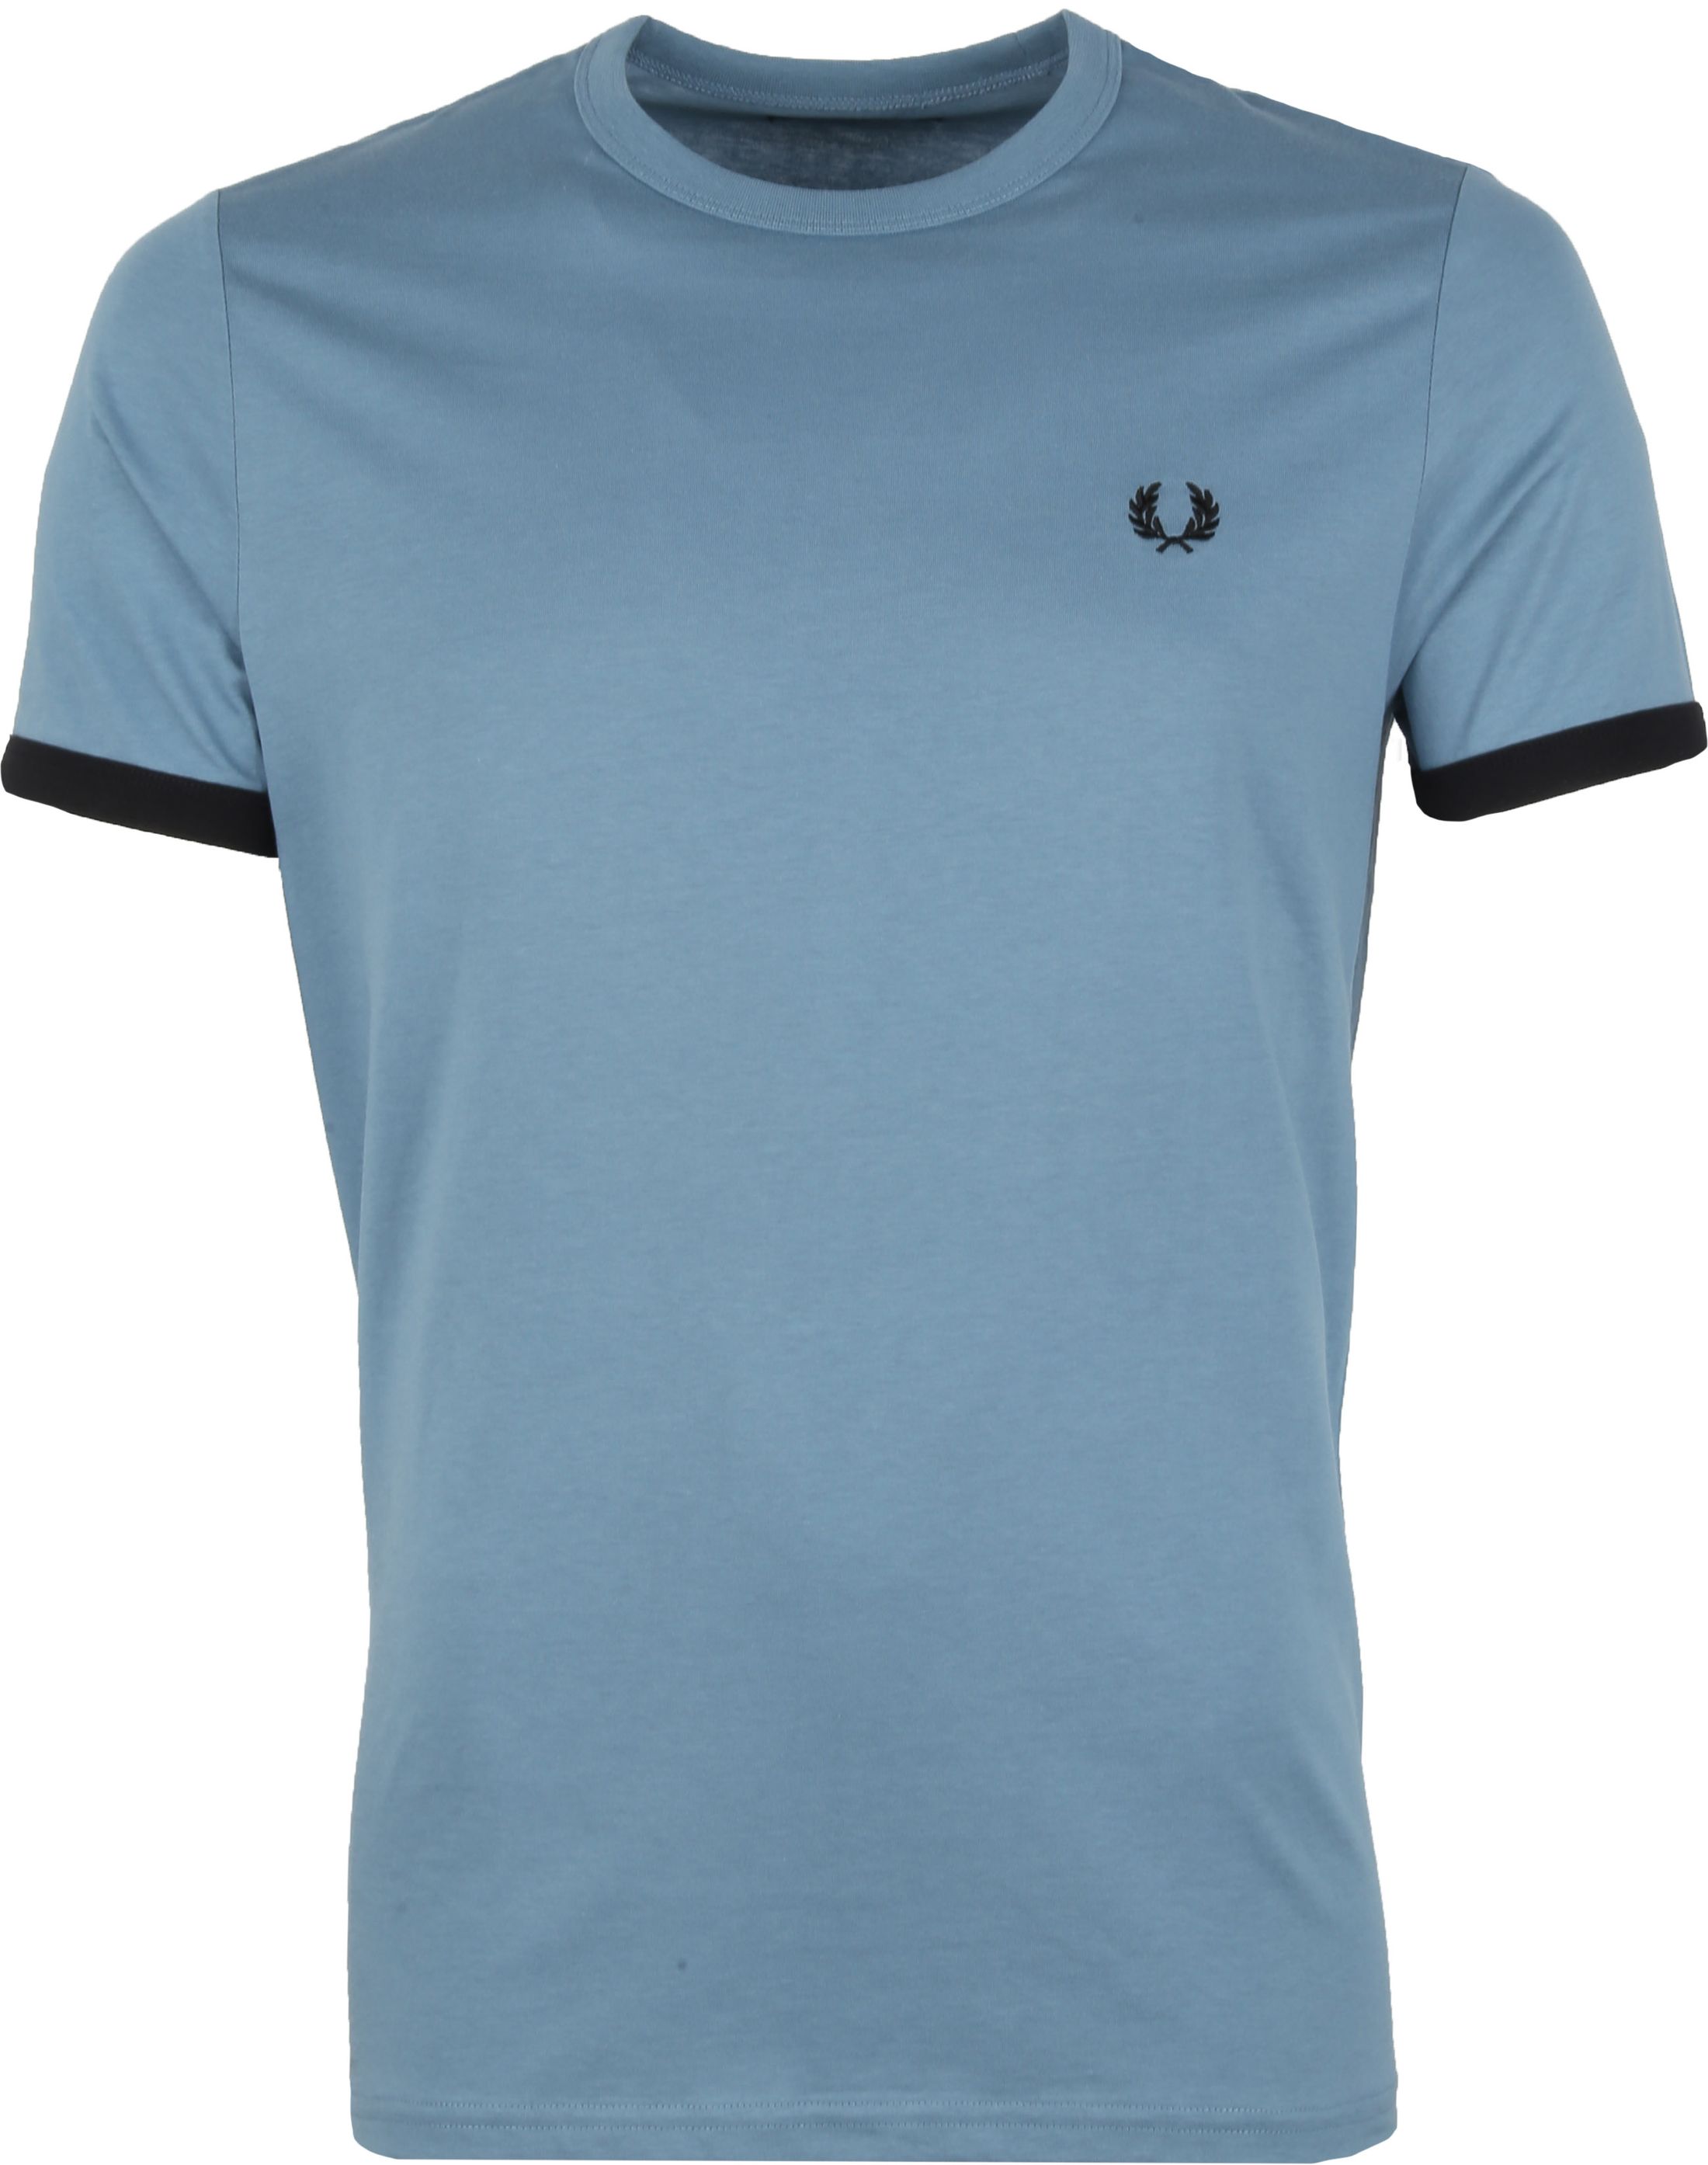 Fred Perry Ringer T-Shirt Mid Blue size XL